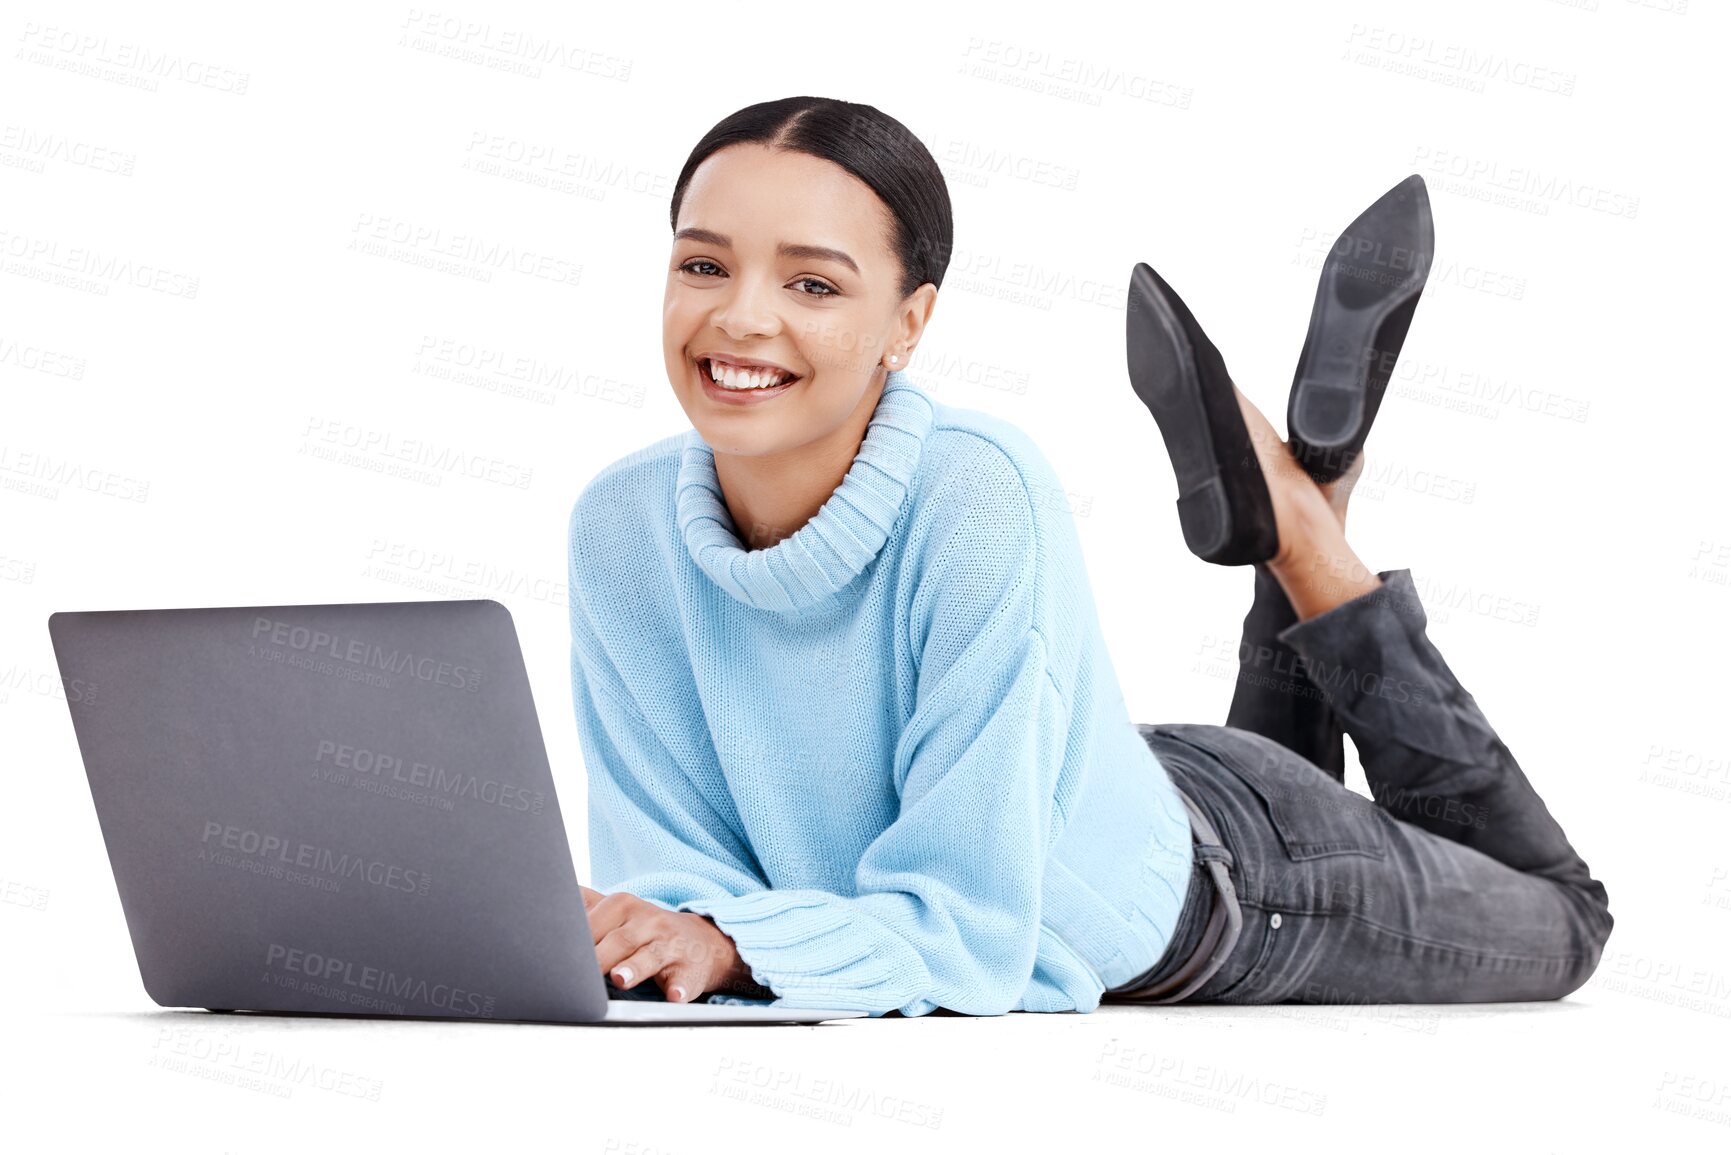 Buy stock photo Laptop, relax and portrait of woman online for website on isolated, png and transparent background. Student, digital learning and happy female person on computer for research, project and internet